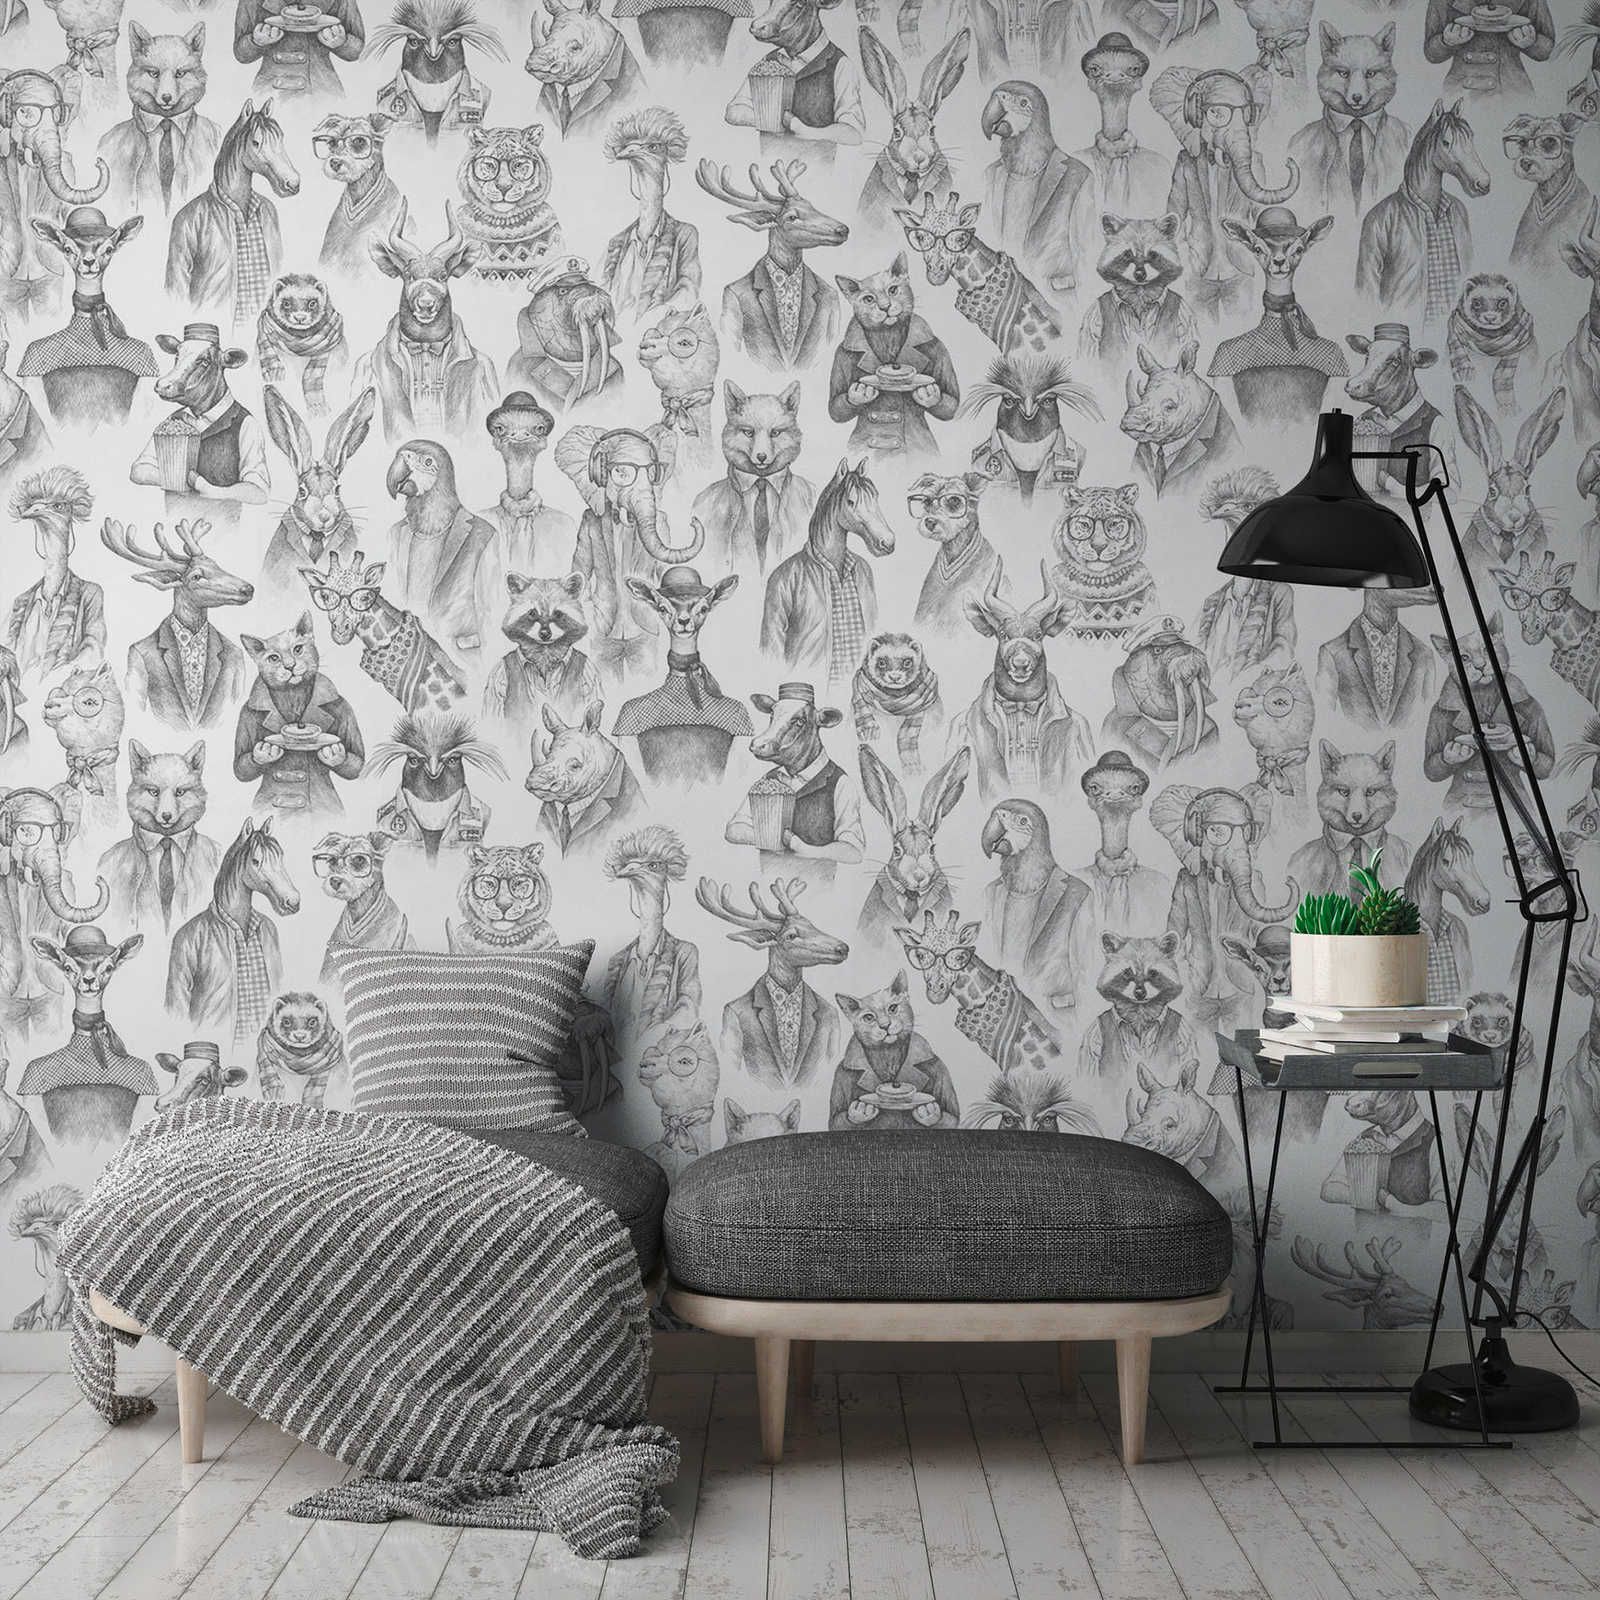 Non-woven wallpaper fabulous animal world by New-Walls - black and white
